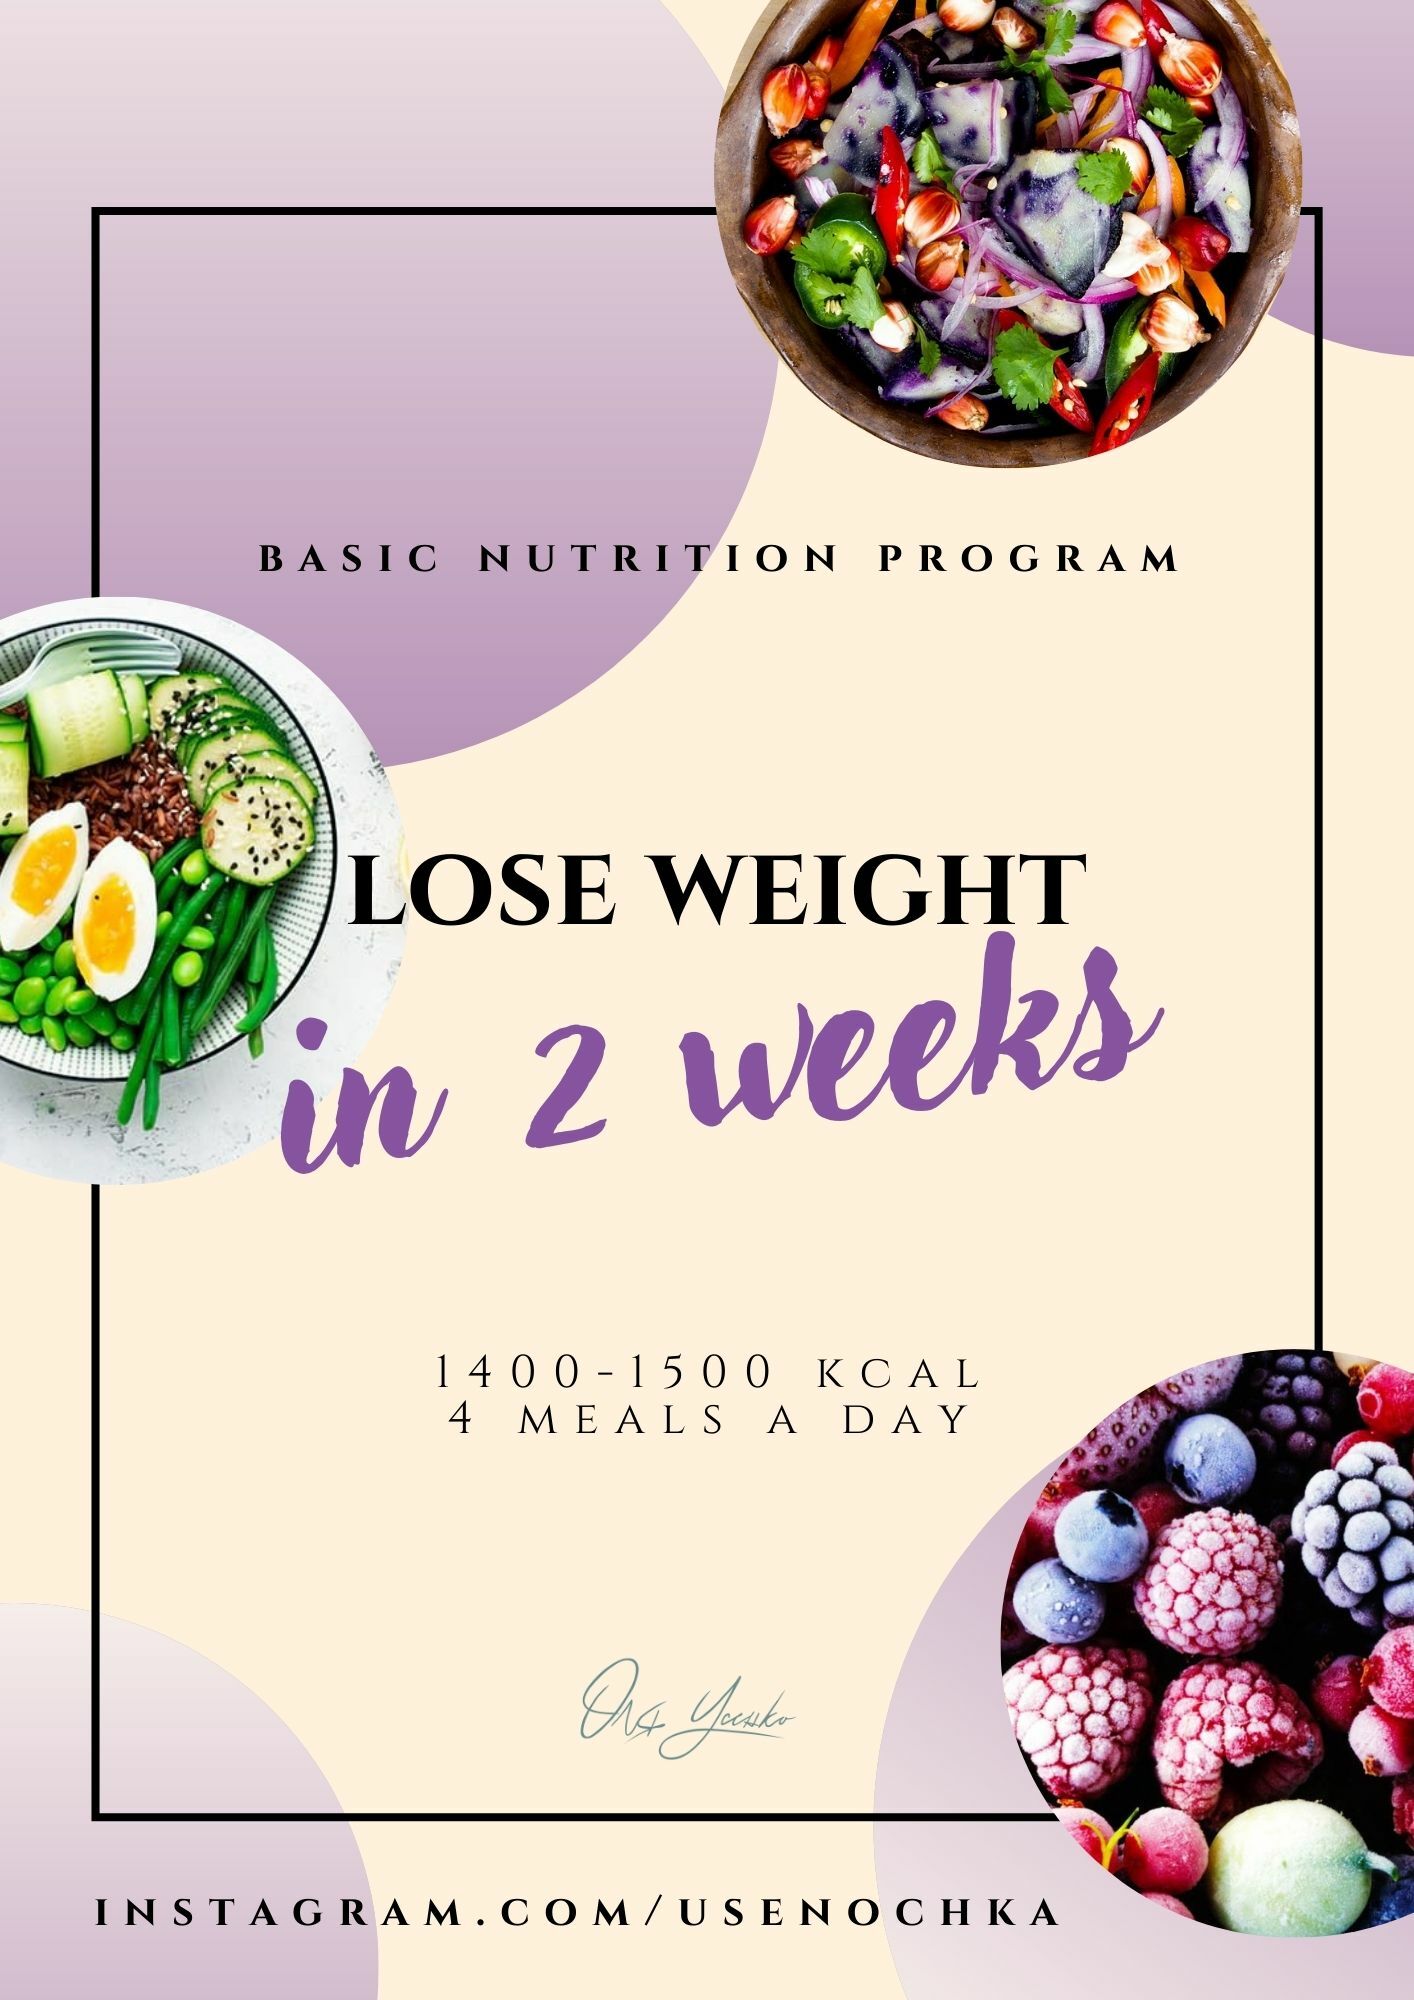 [eng] Lose Weight in 2 weeks